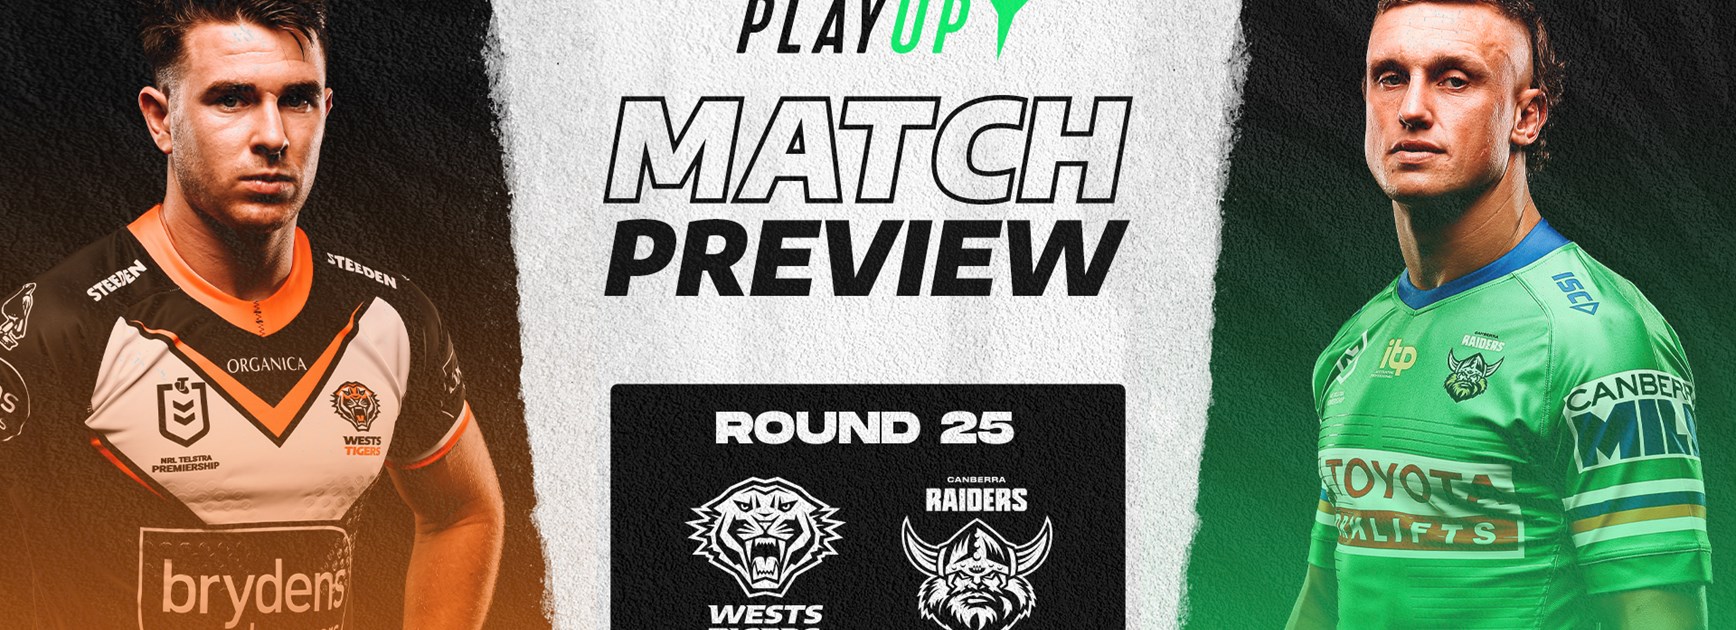 Match Preview: Round 25 vs Canberra Raiders